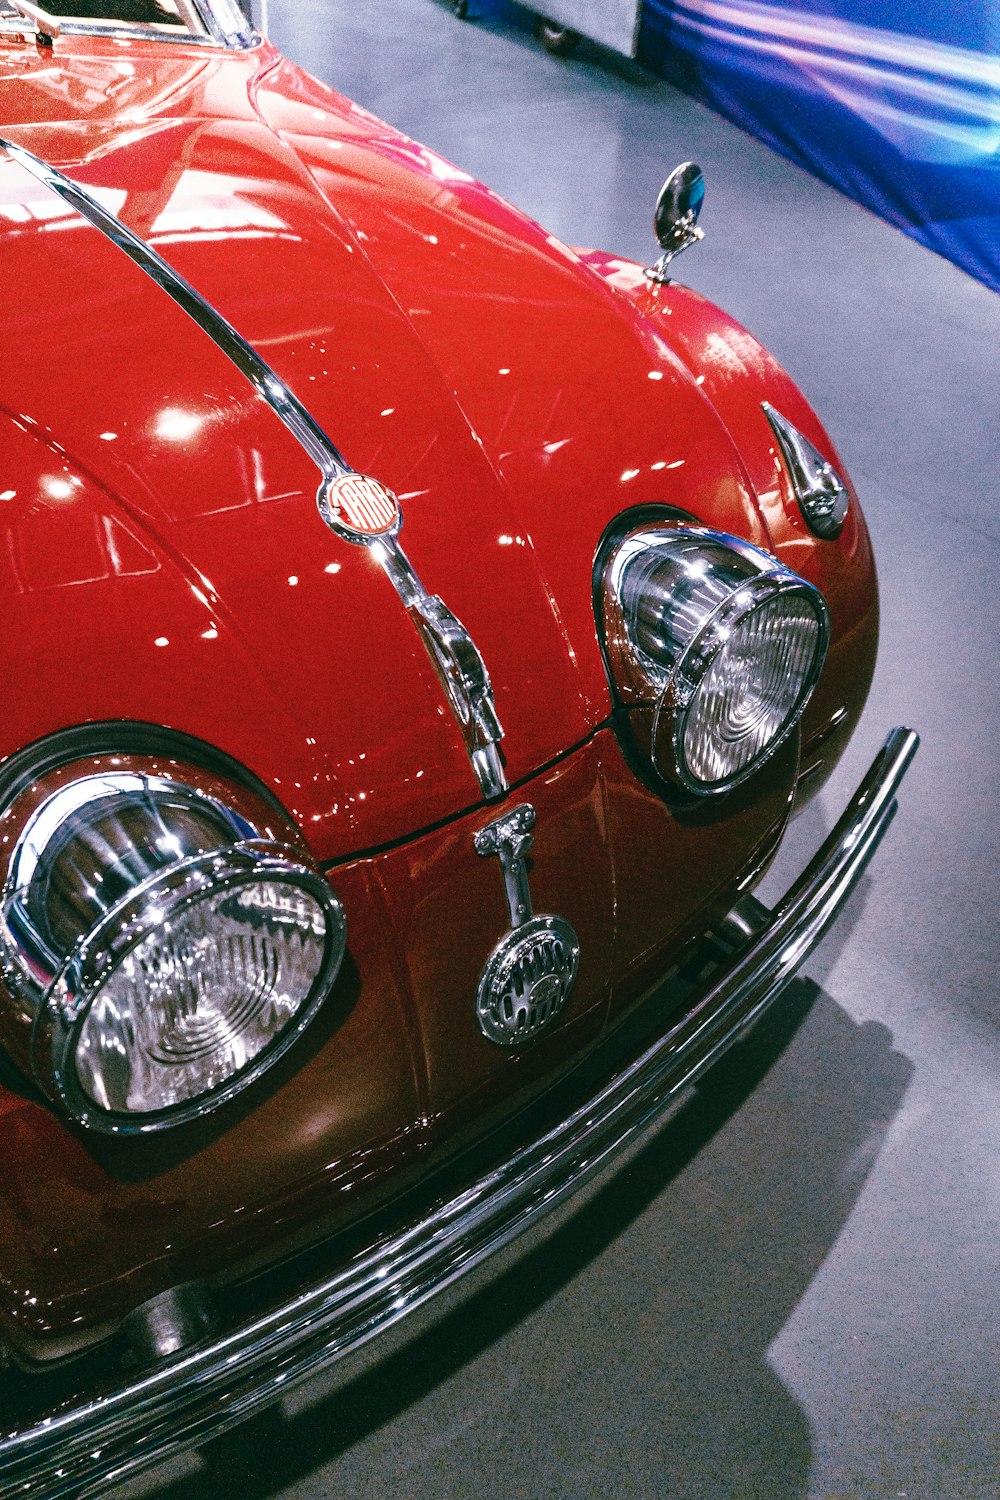 a close up of a red car on display